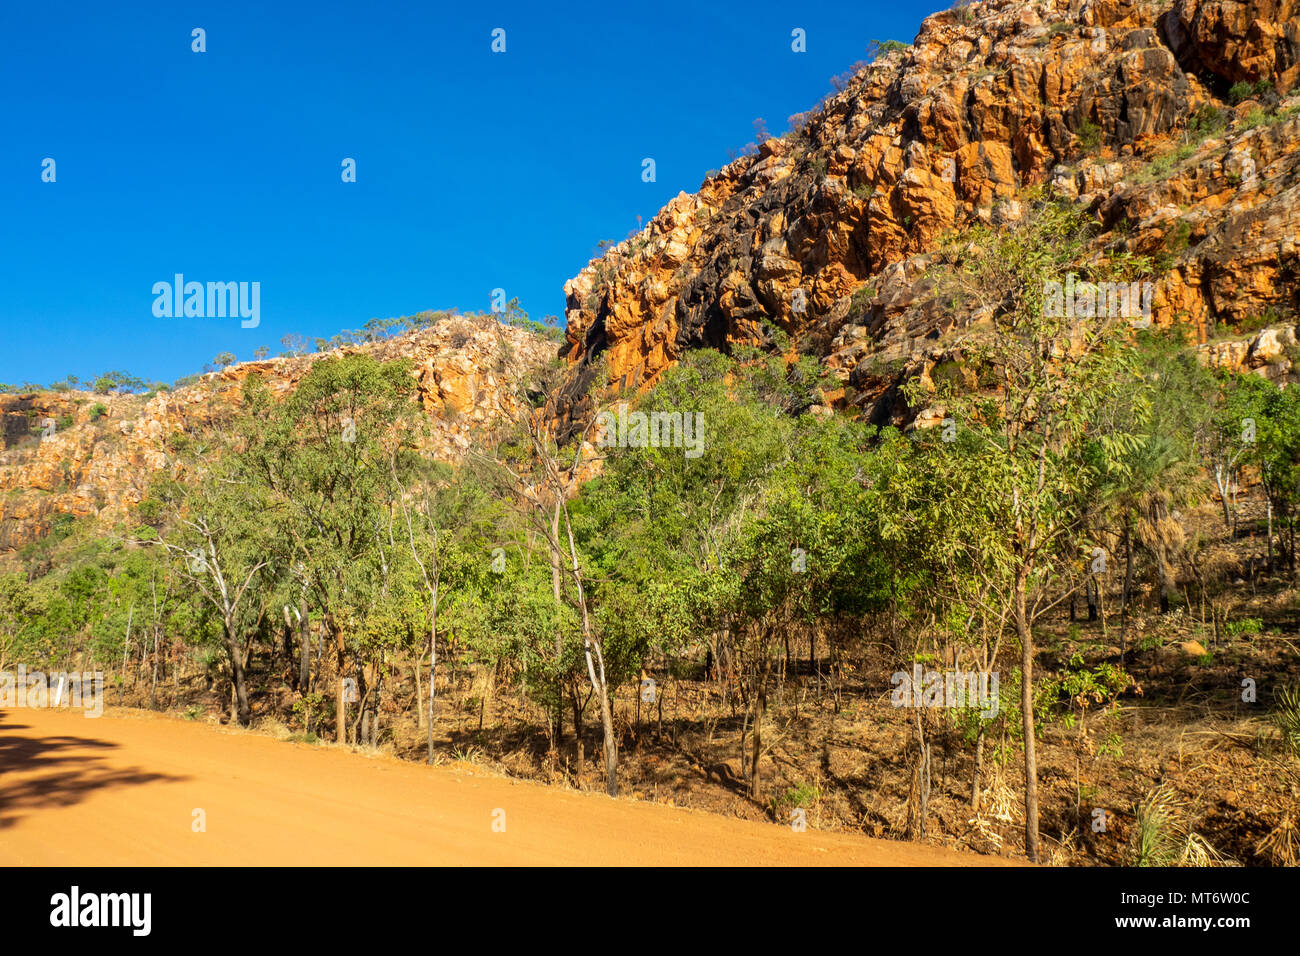 The Gibb River Road, a dirt road, passing through the red pindan cliffs of the King Leopold Ranges in the Kimberley, WA, Australia. Stock Photo